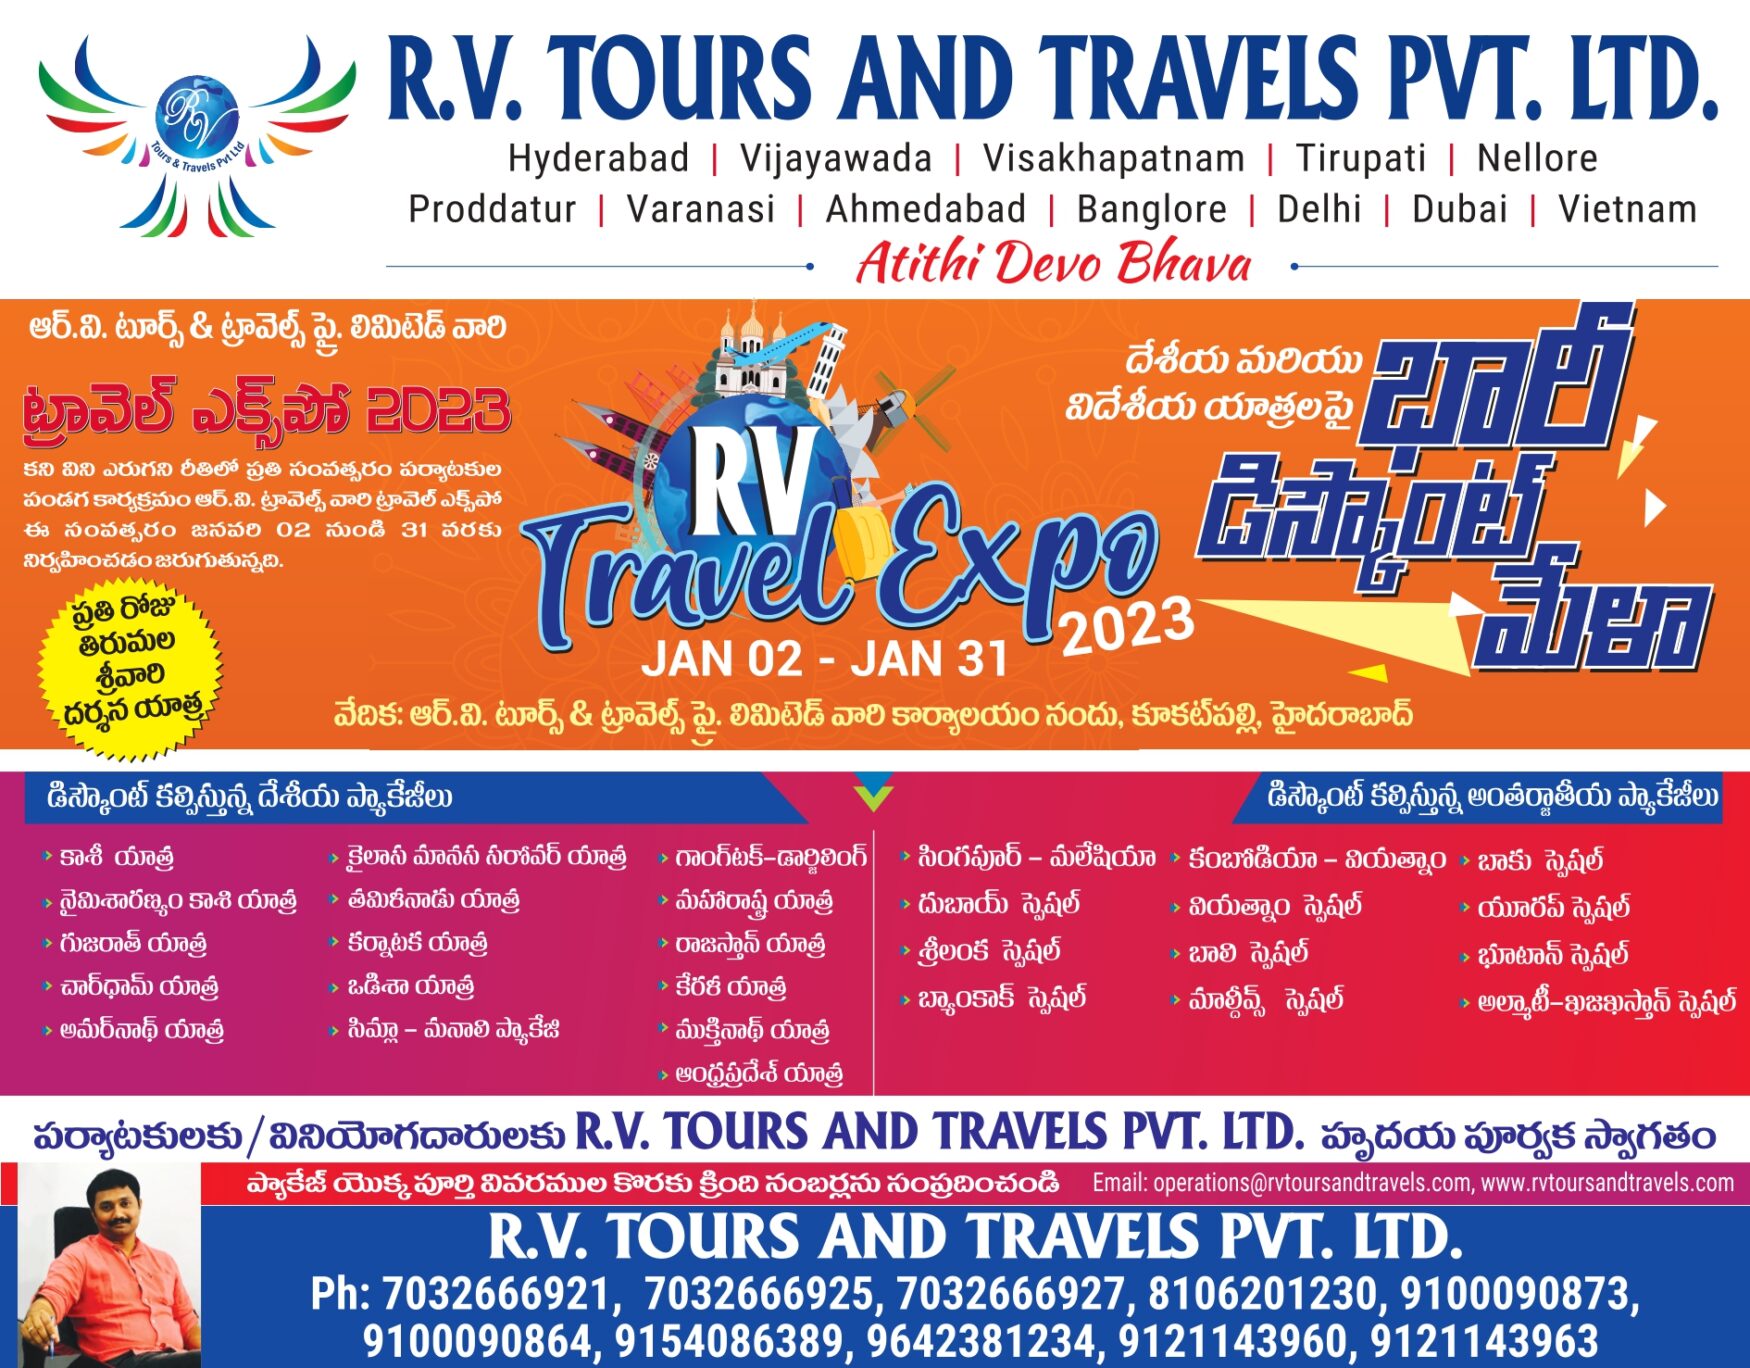 v tours and travels